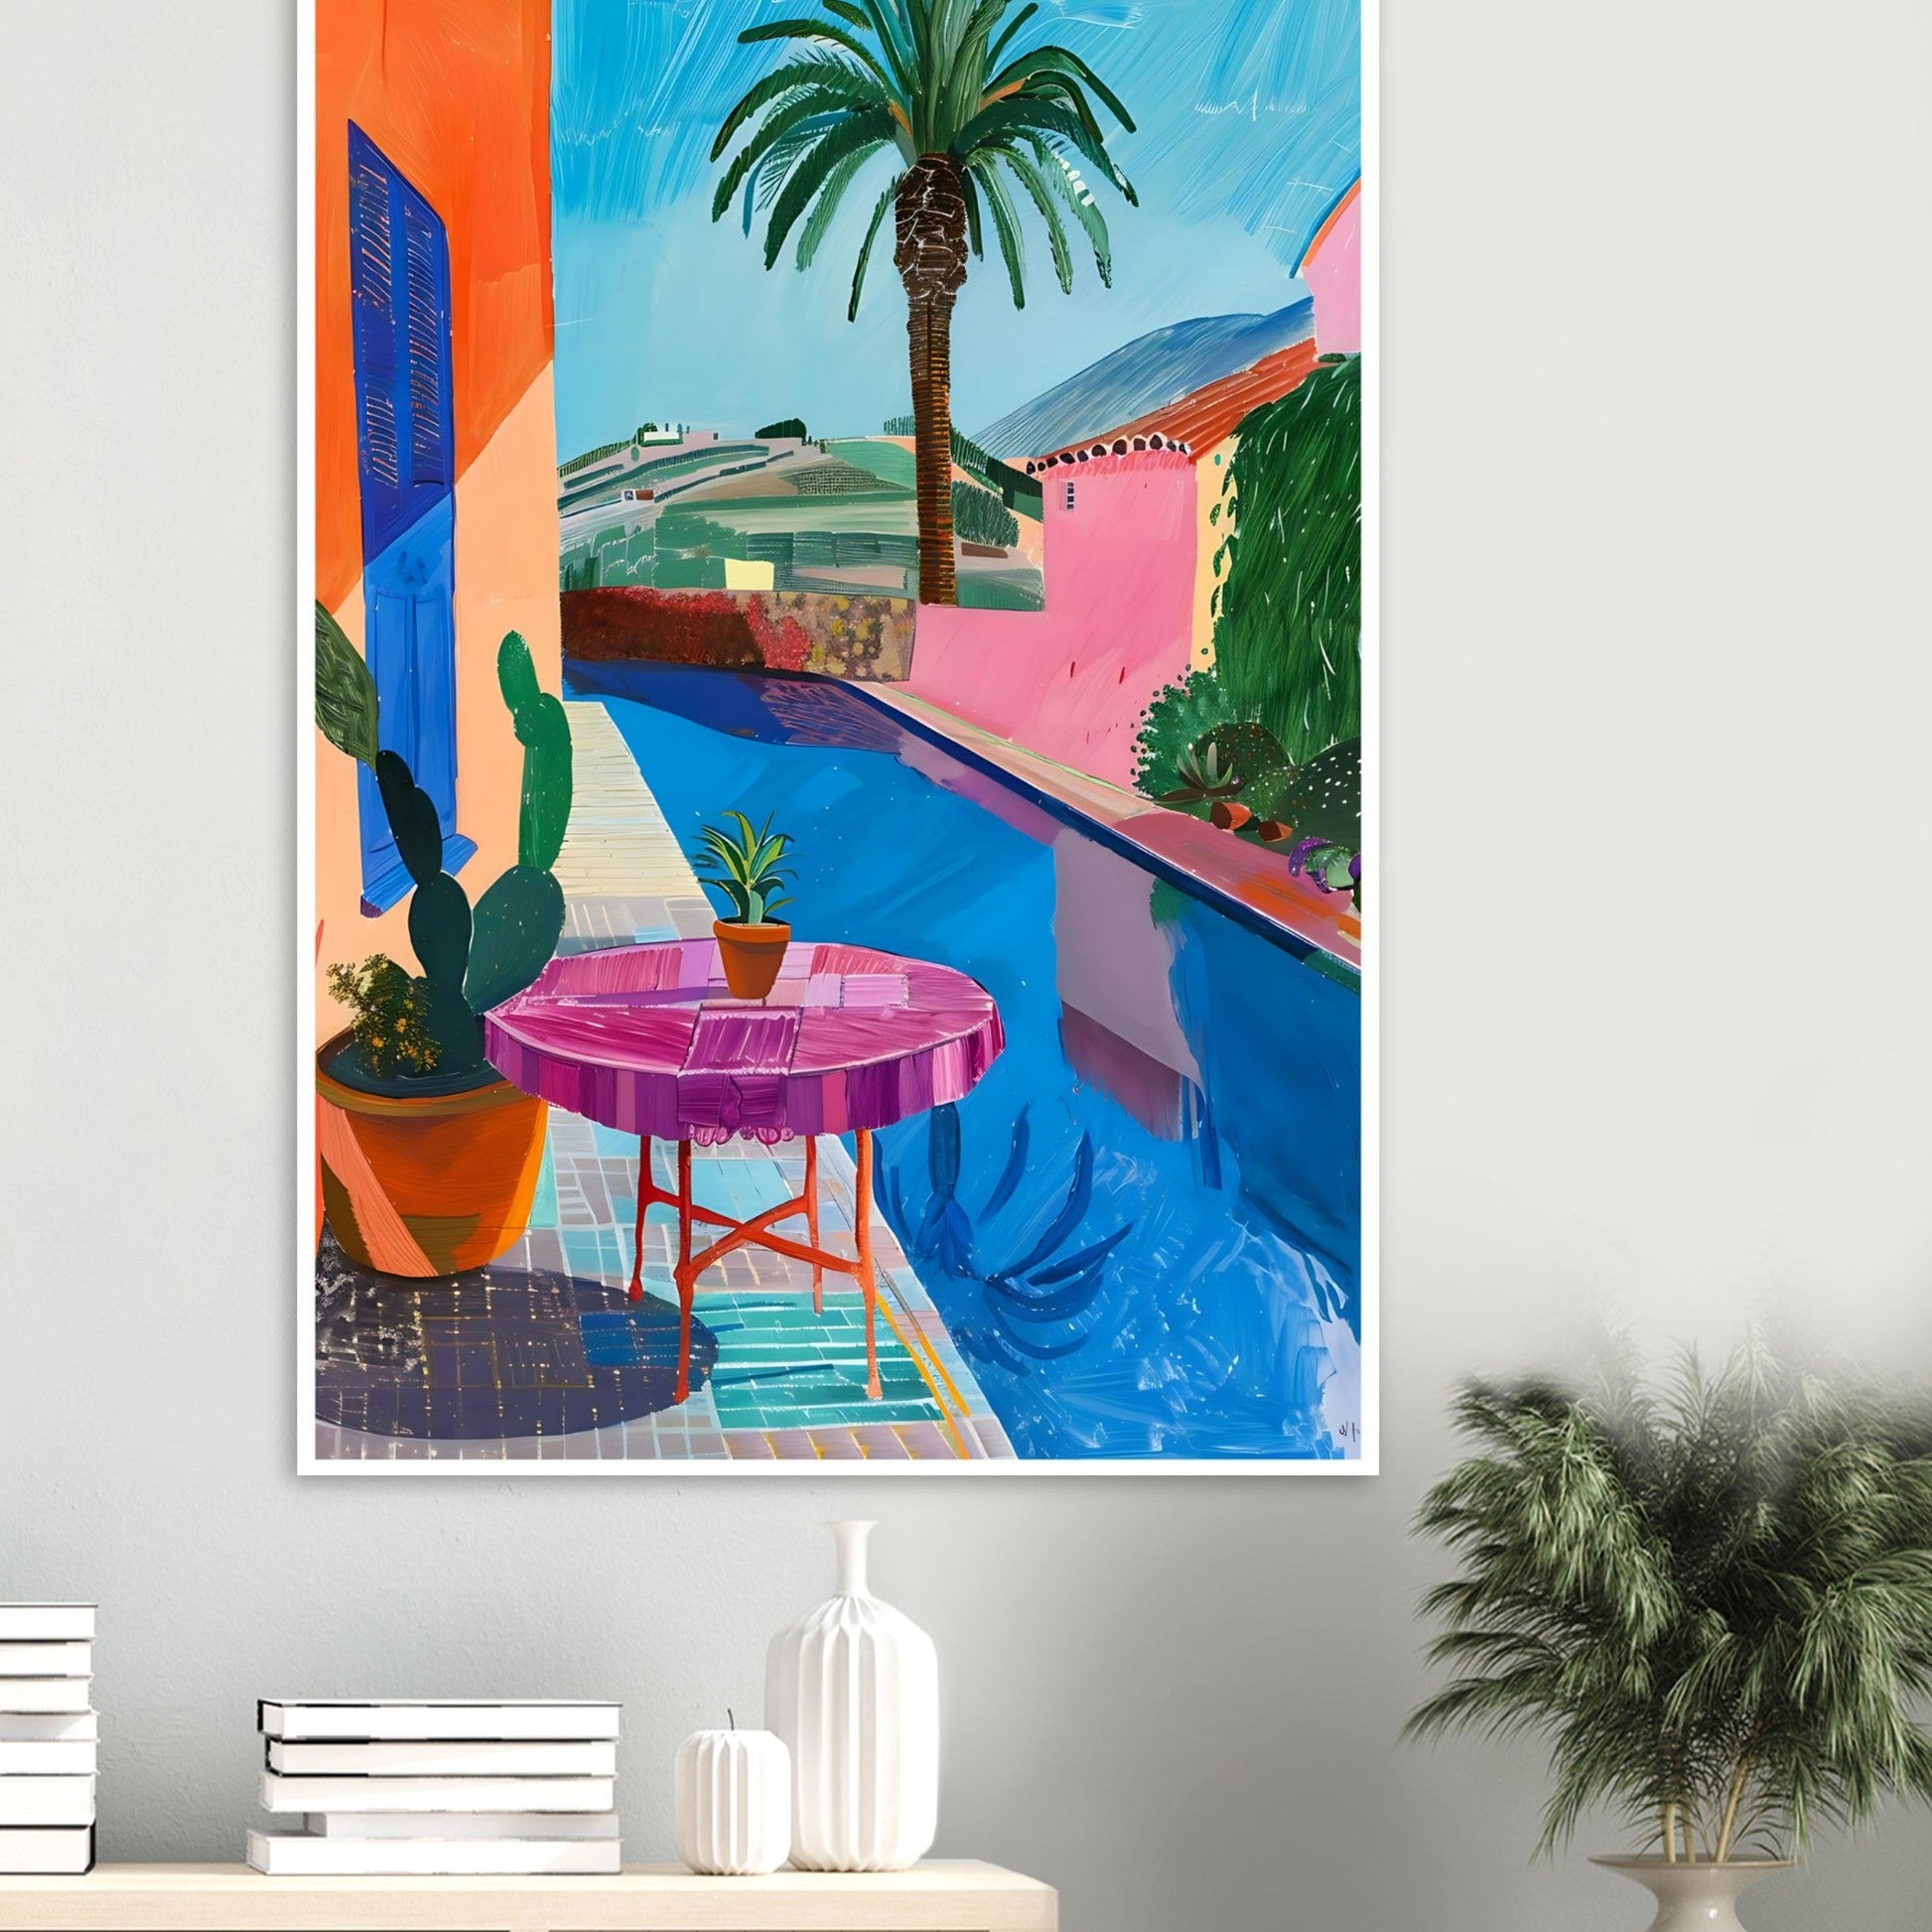 By the Pool - David Hockney, green, Pink, seascape, #illieeart